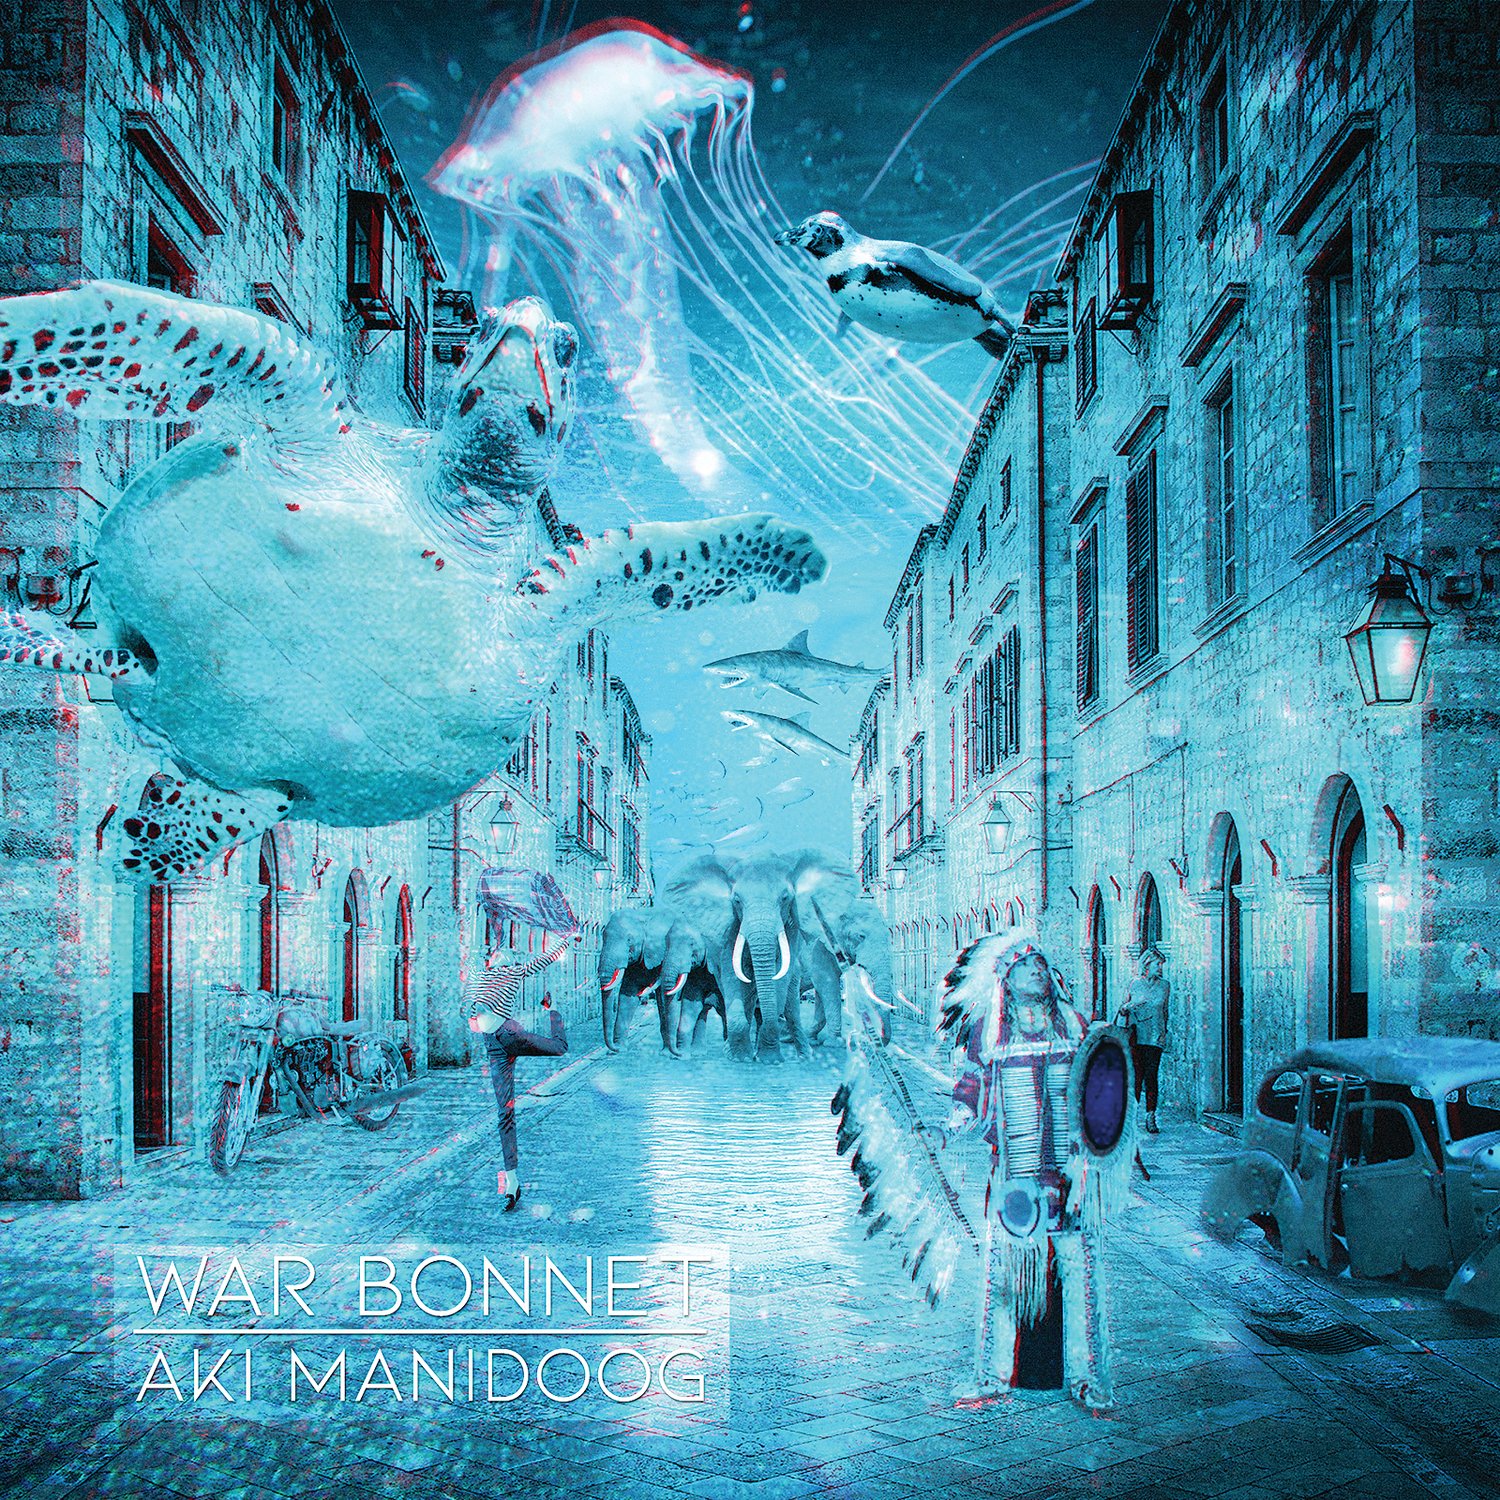 Cover art for Aki Manidoog, the third album produced by War Bonnet that was recently released.